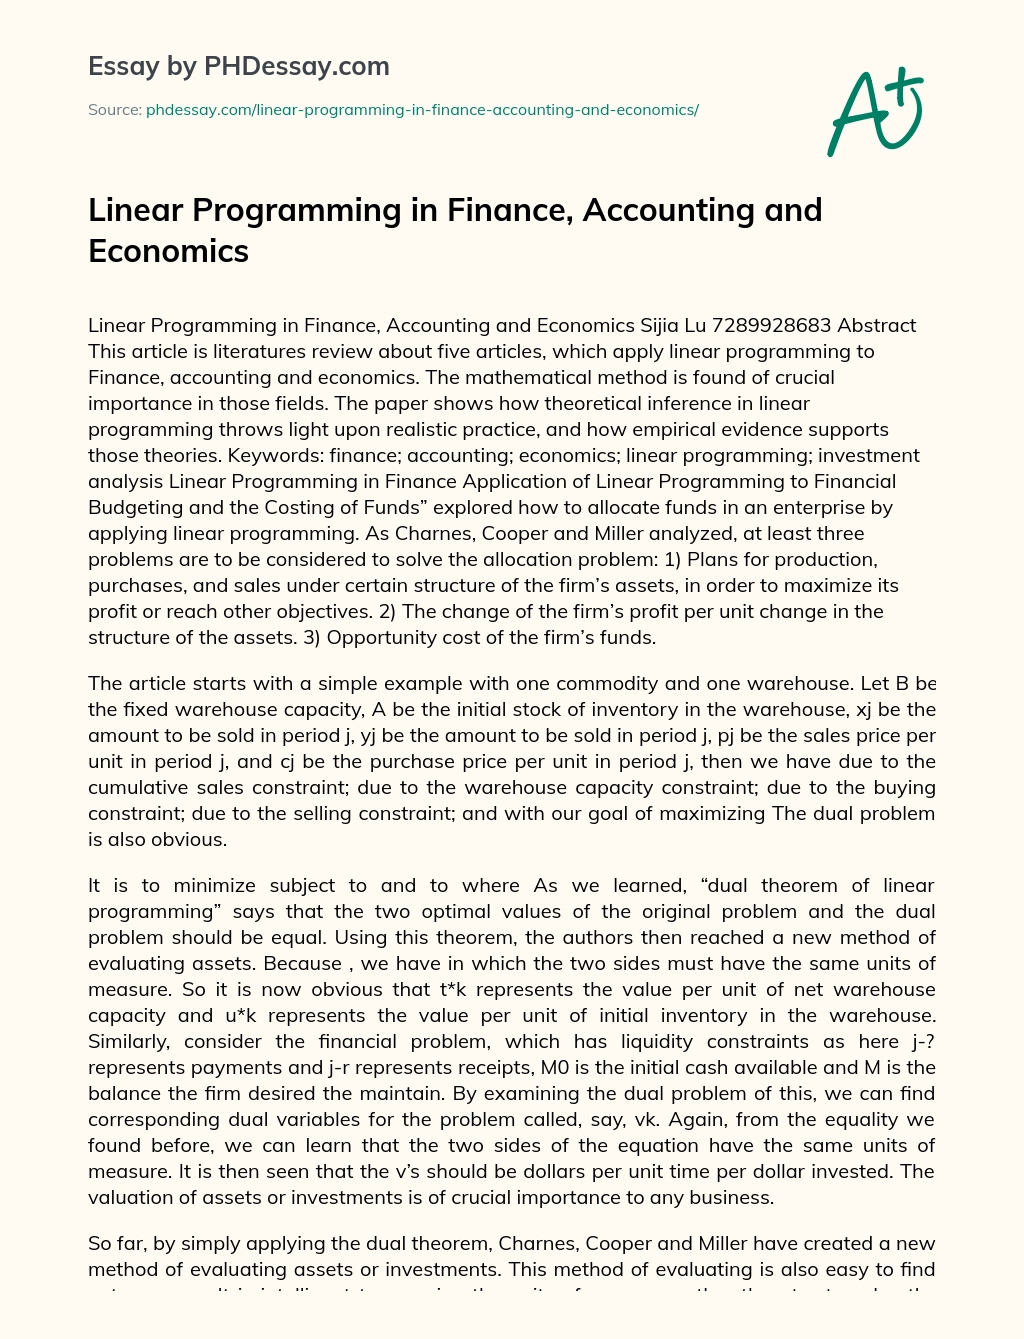 Linear Programming in Finance, Accounting and Economics essay